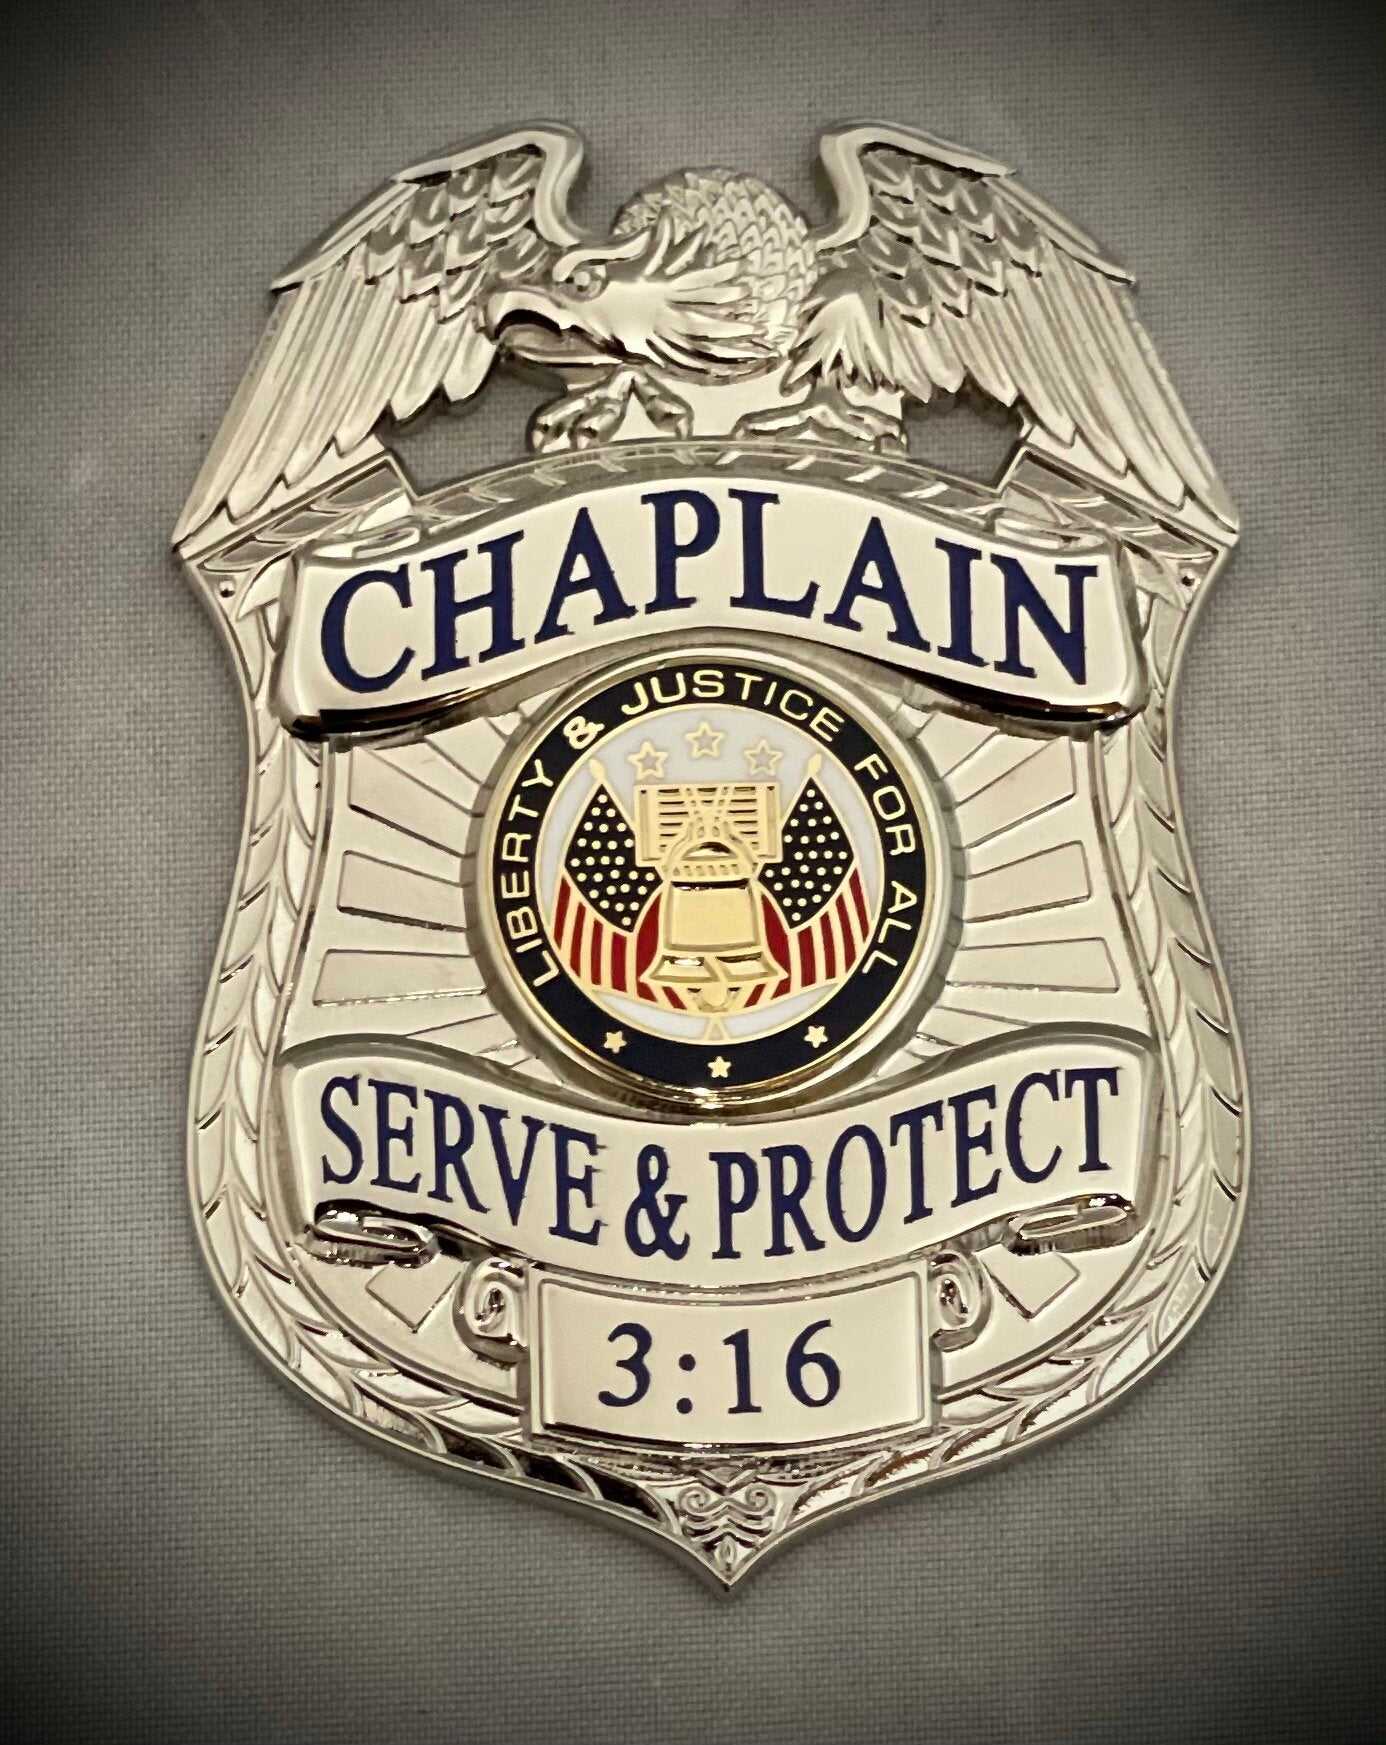 Chaplain Serve and Protect Silver Badge and 2 Nameplates leather ID holder